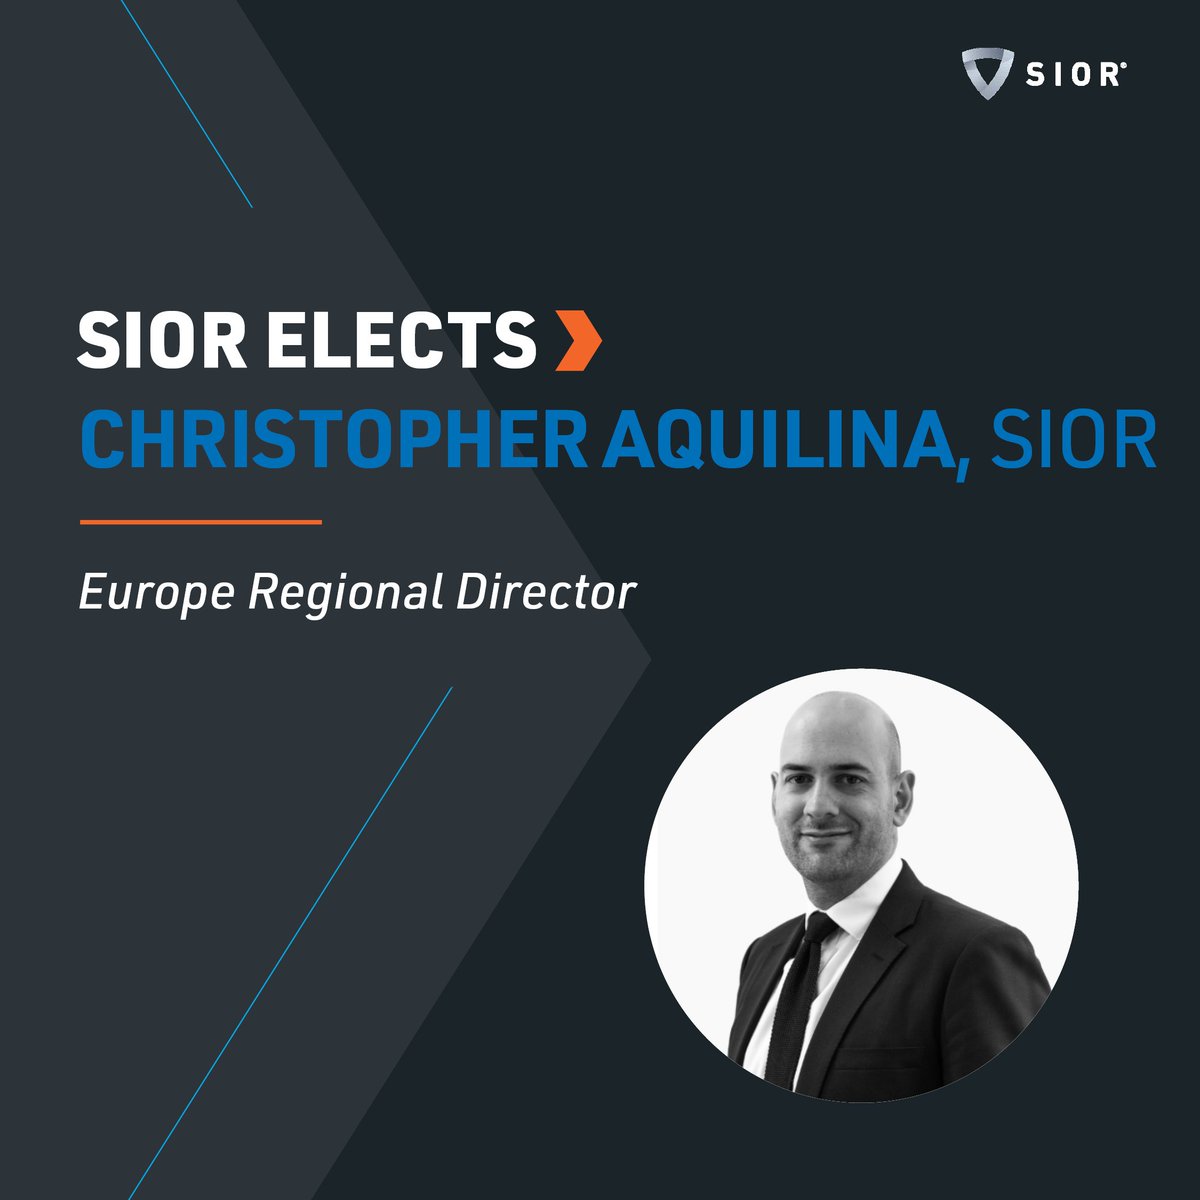 Huge congrats to Christopher Aquilina, SIOR, for his election to serve as SIOR Europe Regional Director! With a focus on #CRE transactions in Central London and throughout the U.K., we know he will lead his region with great skill & dedication once he assumes his role this fall.